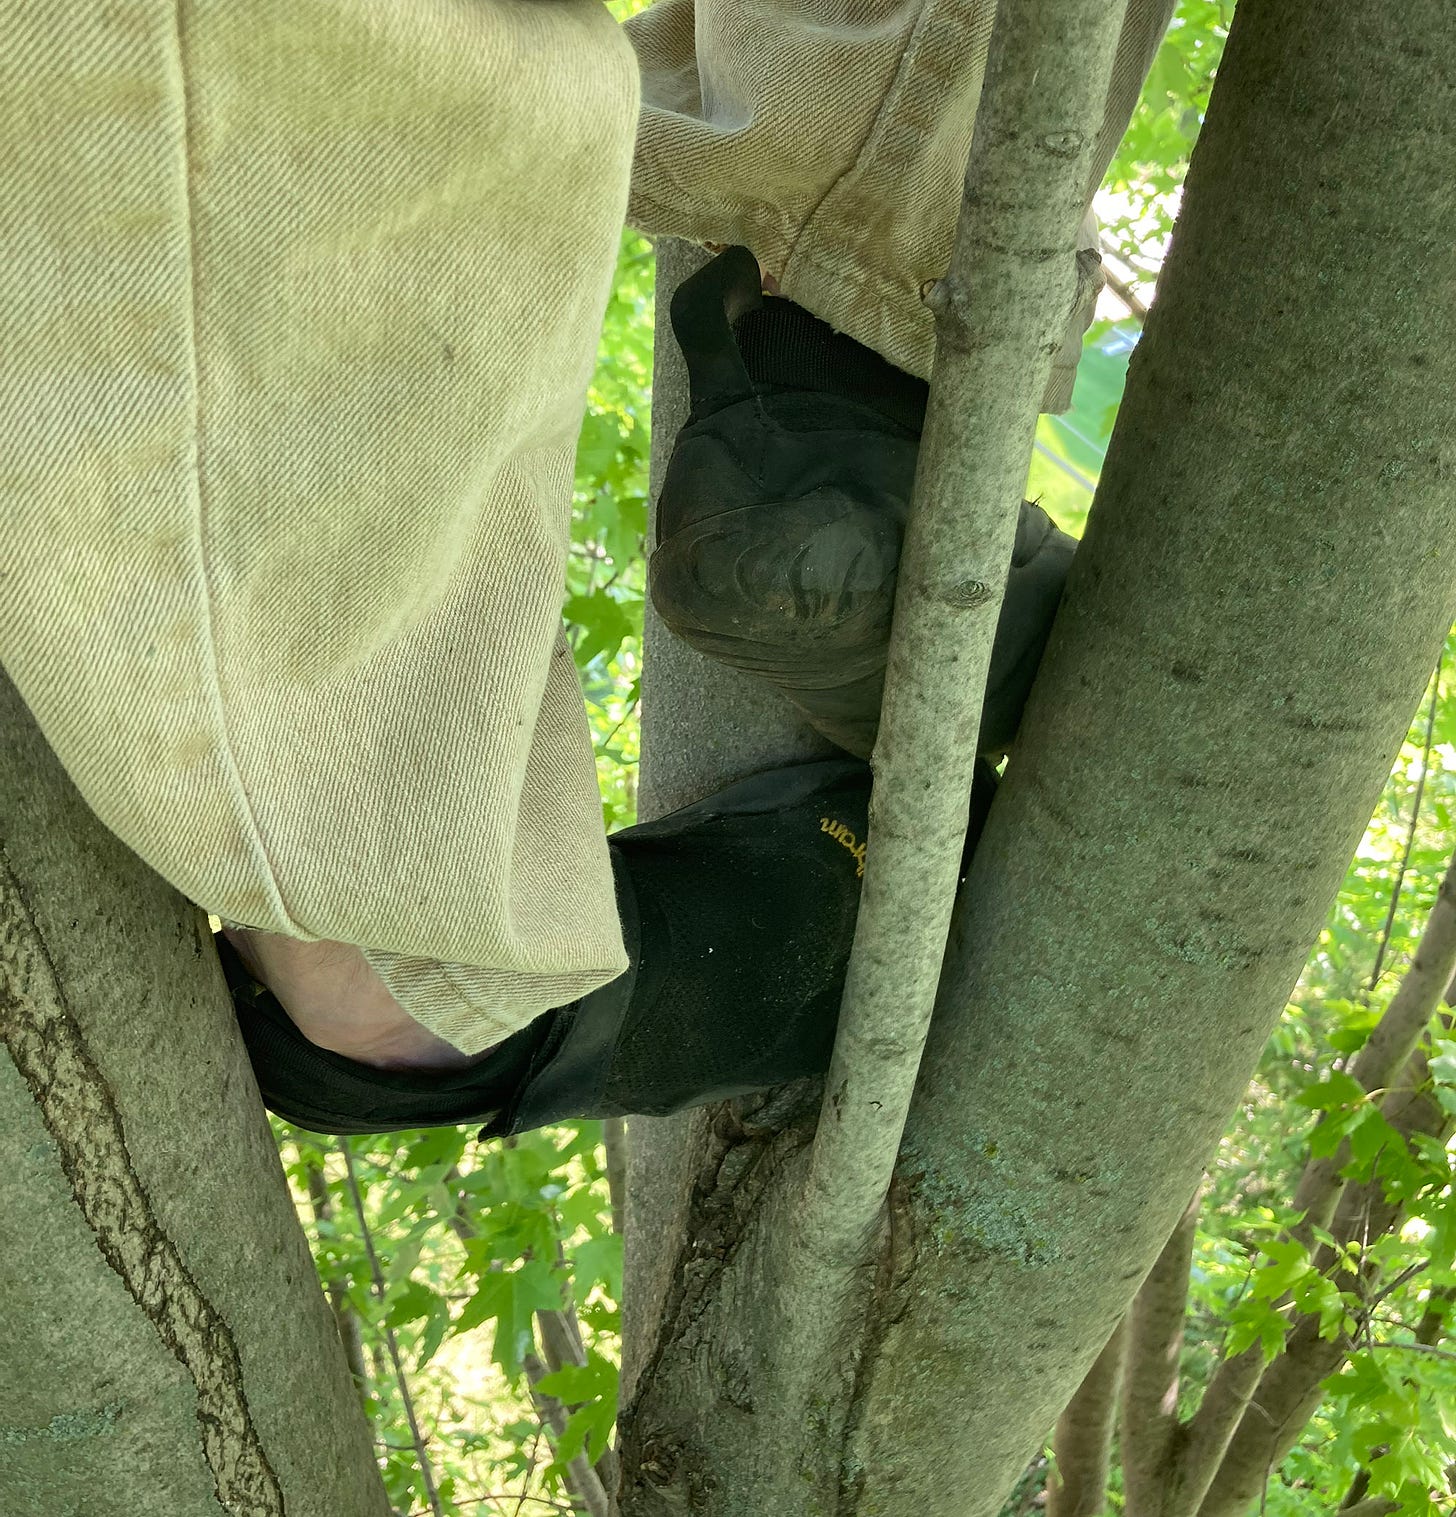 The author's feet crammed into the narrow space between vertical tree branches